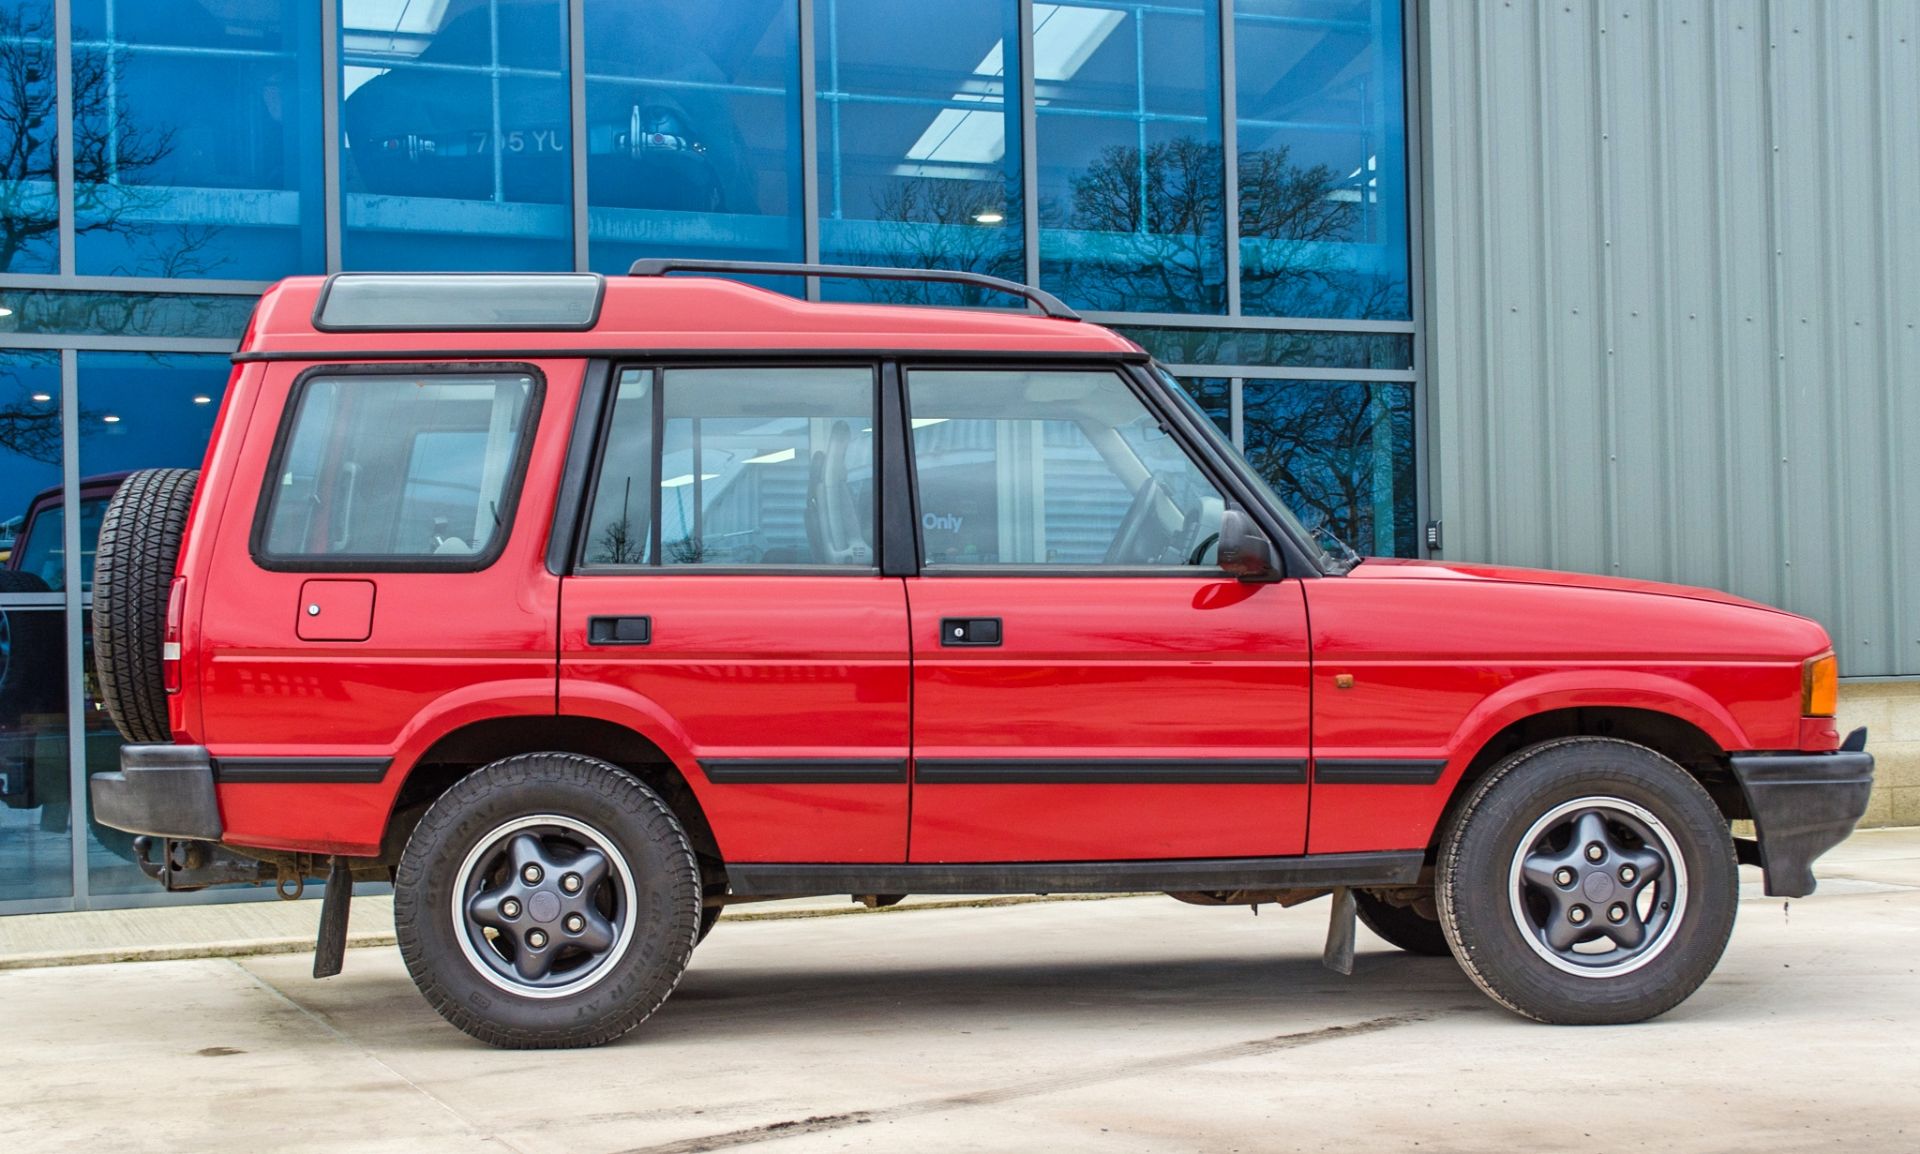 1998 Landrover Discovery 3.9 litre V8 manual 5 door 4wd - Image 13 of 46